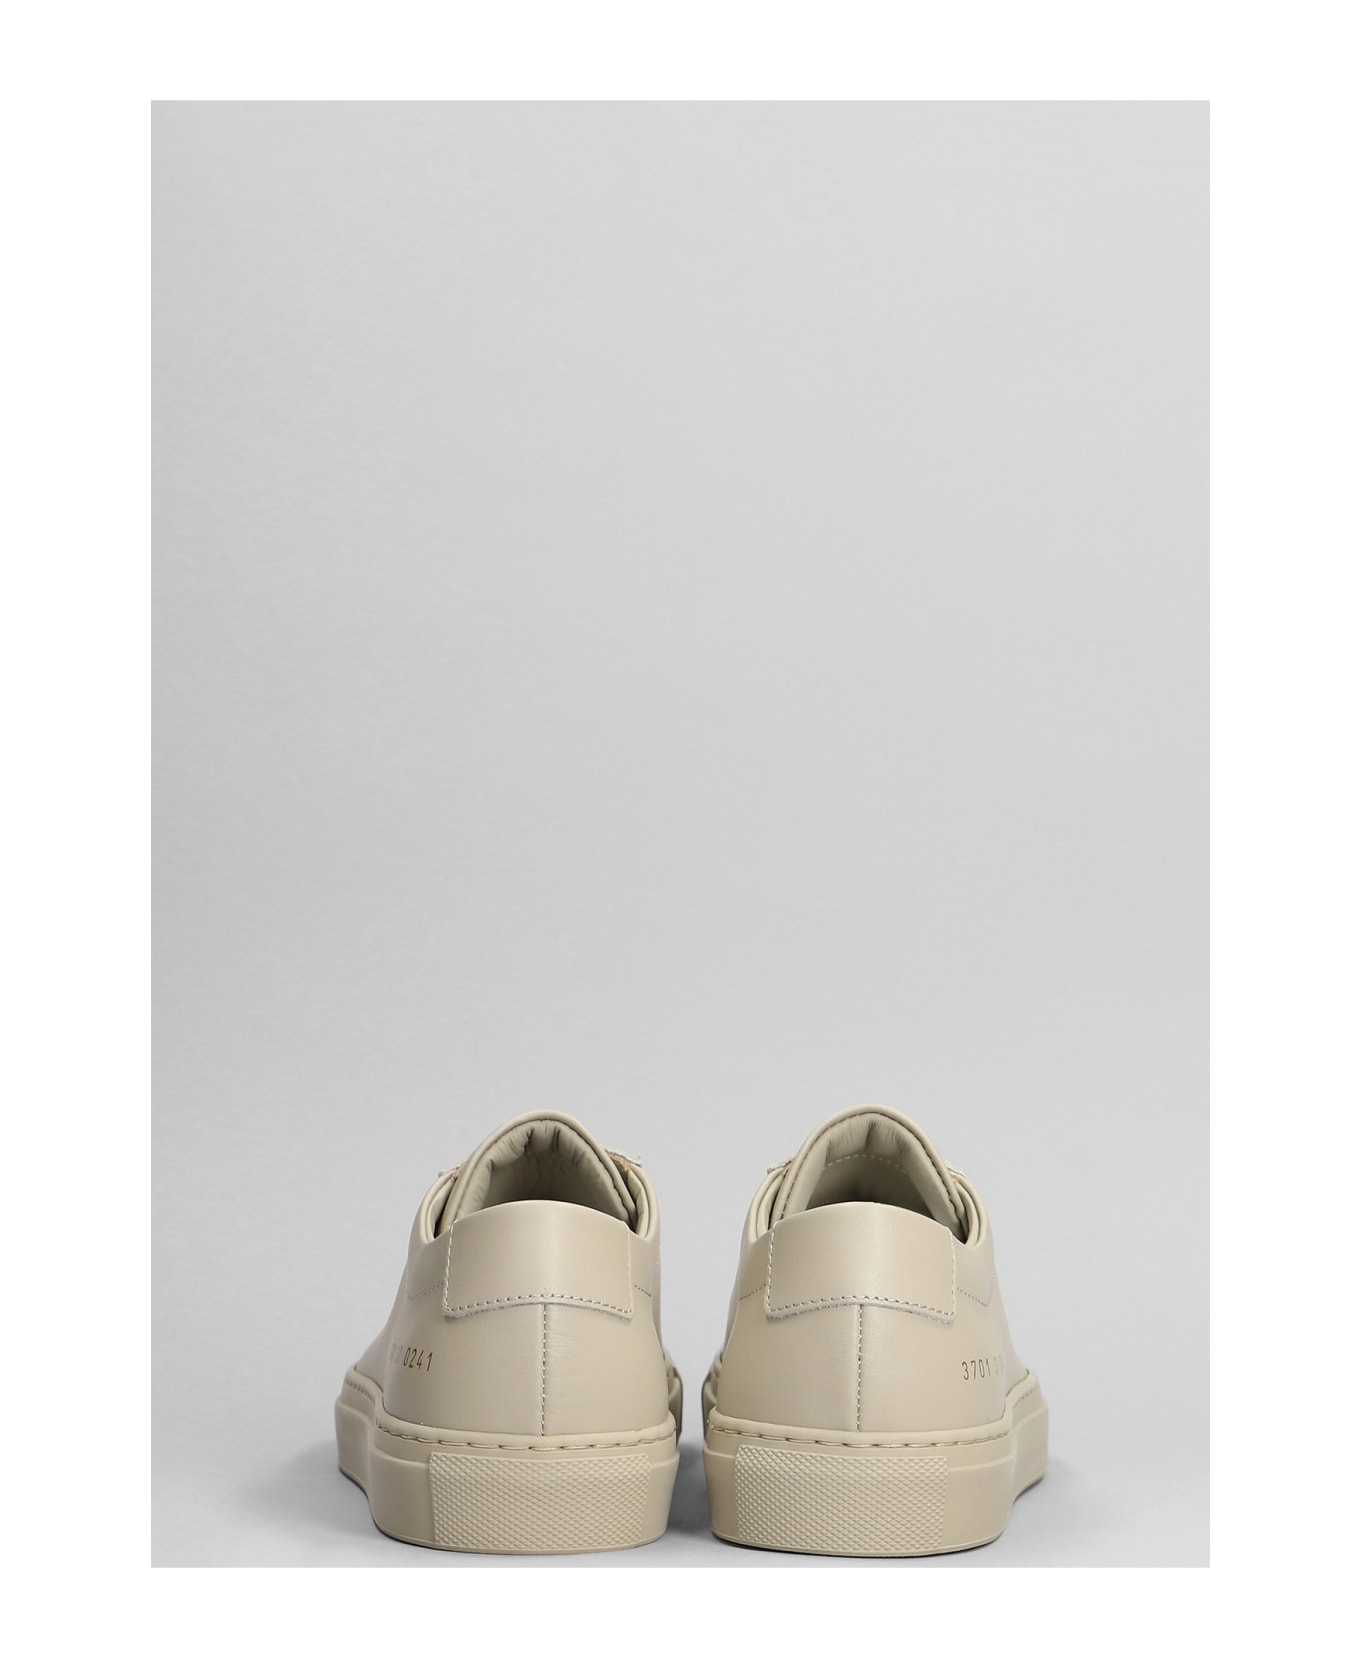 Common Projects Original Achilles Sneakers In Taupe Leather - taupe